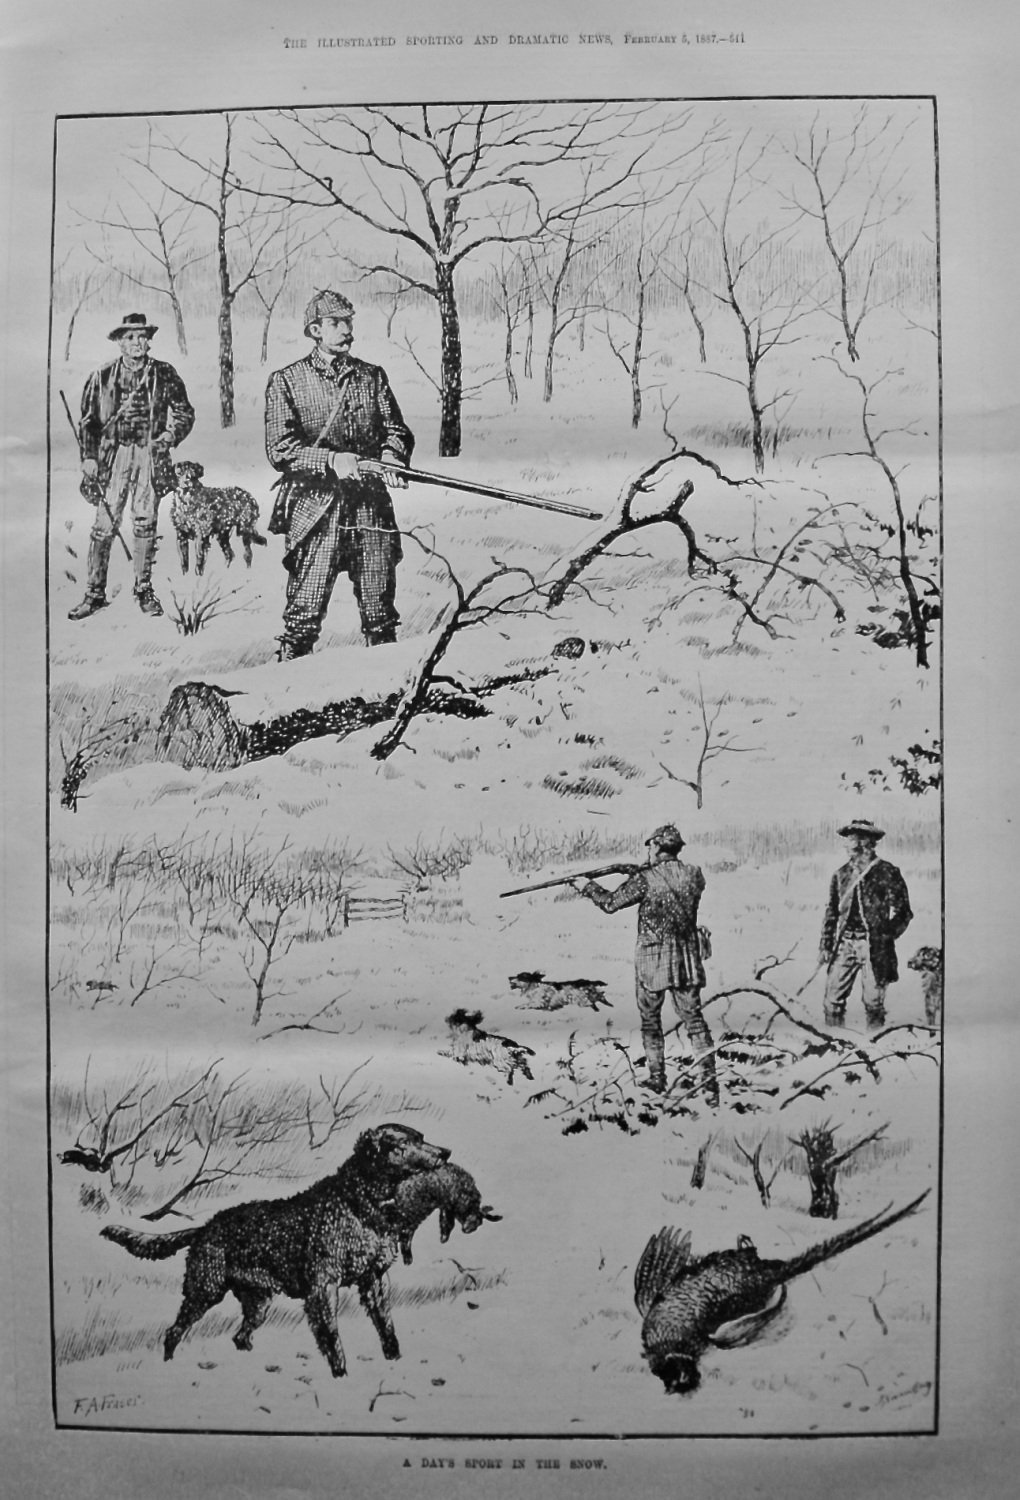 A Day's Sport in the Snow. 1887.